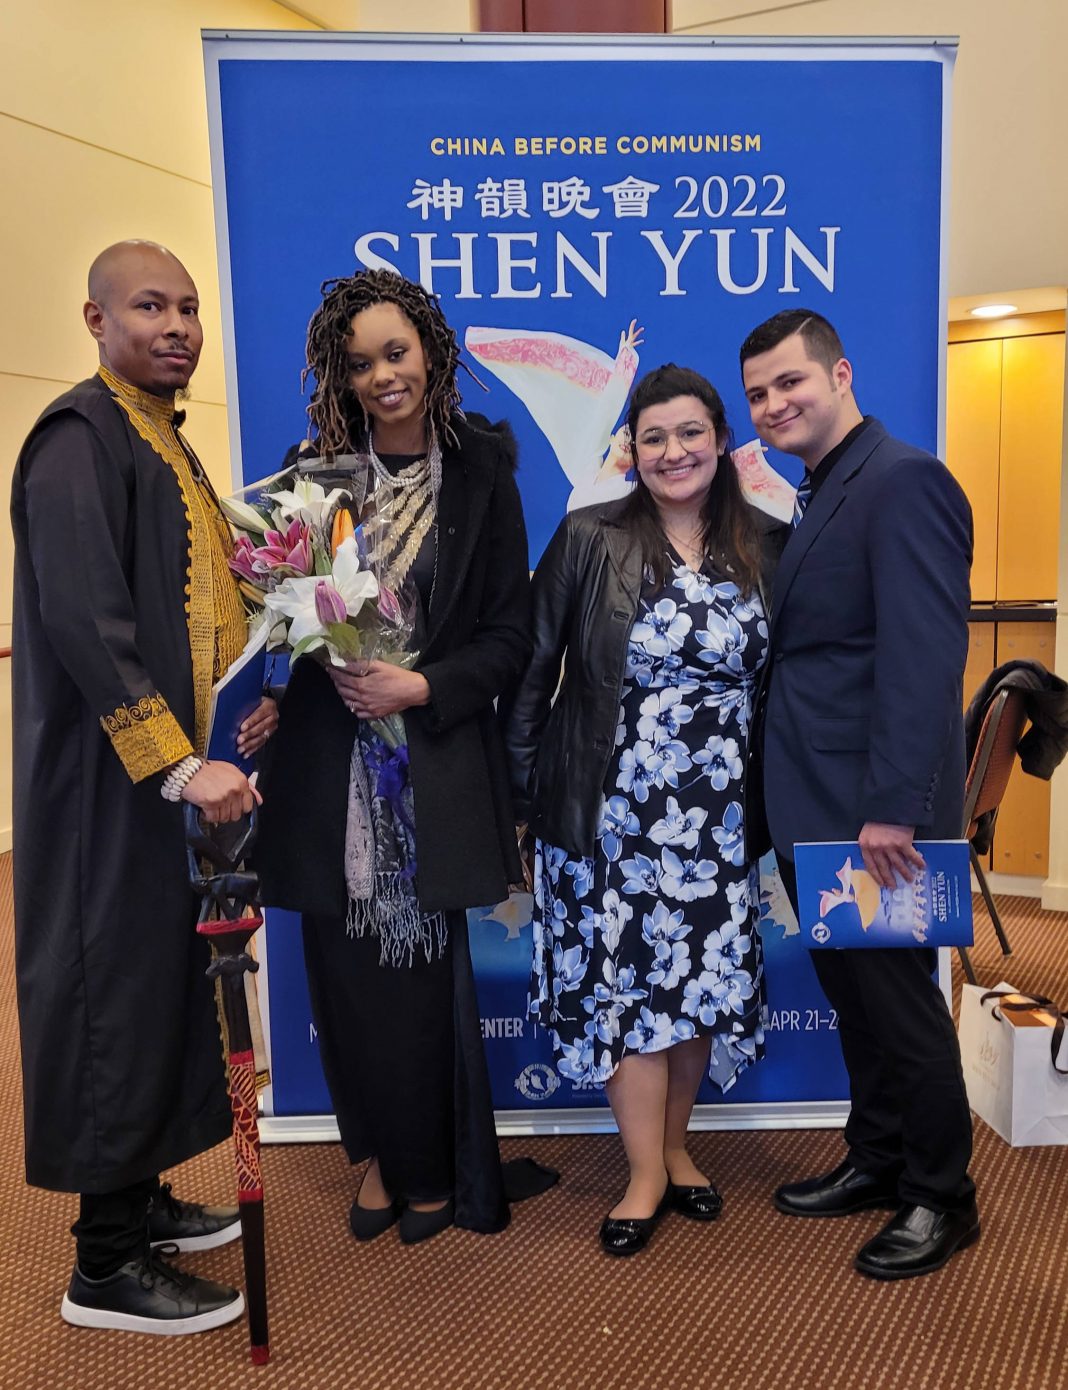 Shen Yun Enchants a Packed Audience at The Palace Theatre in Stamford